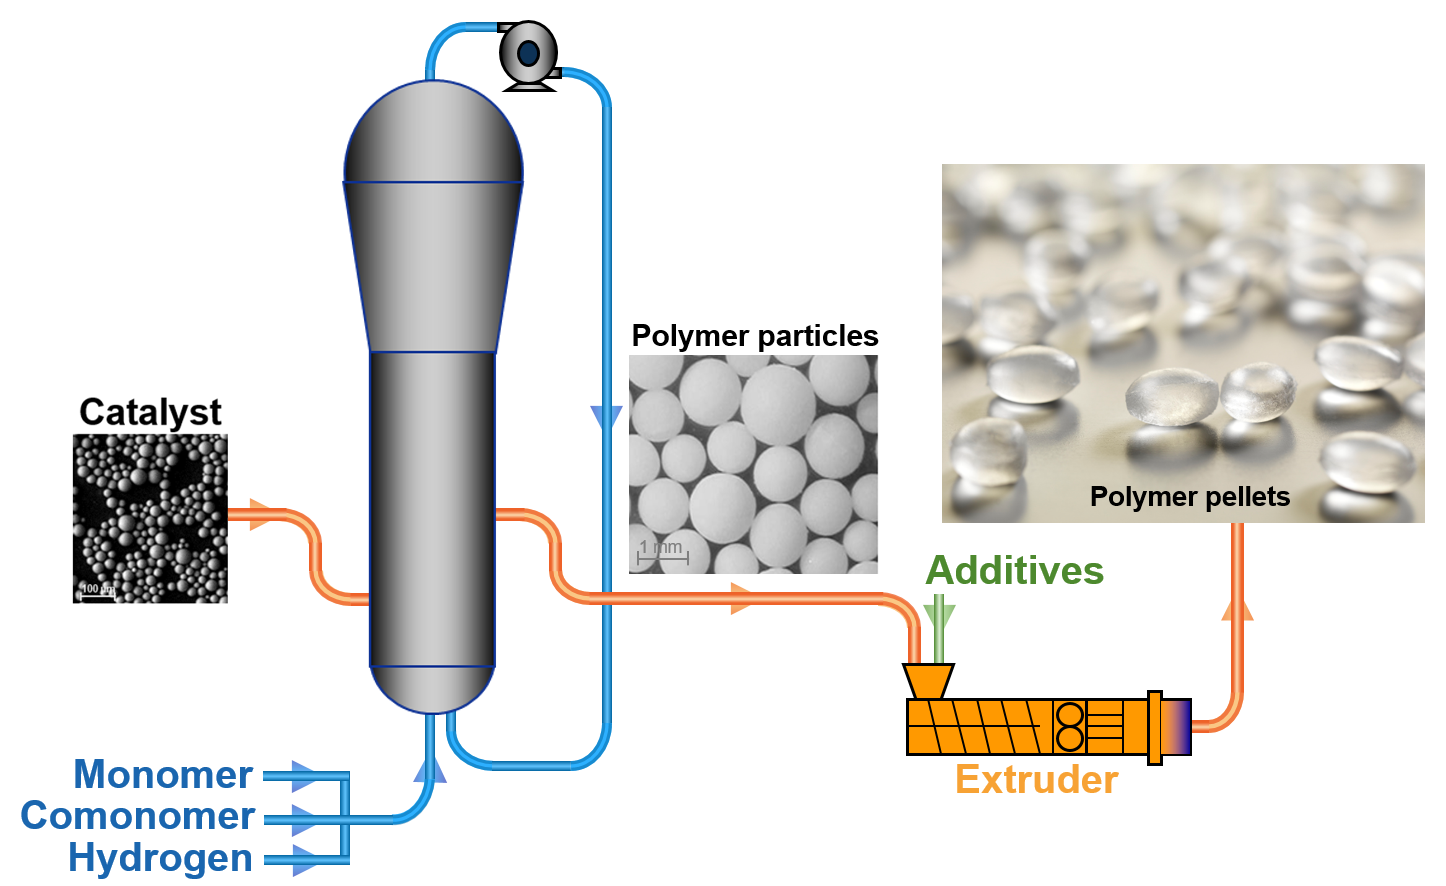 An example of the manufacture of polymers where the catalyst is injected in a reactor containing the monomer and hydrogen under pressure where the polymer particles are formed and removed from the reactor.